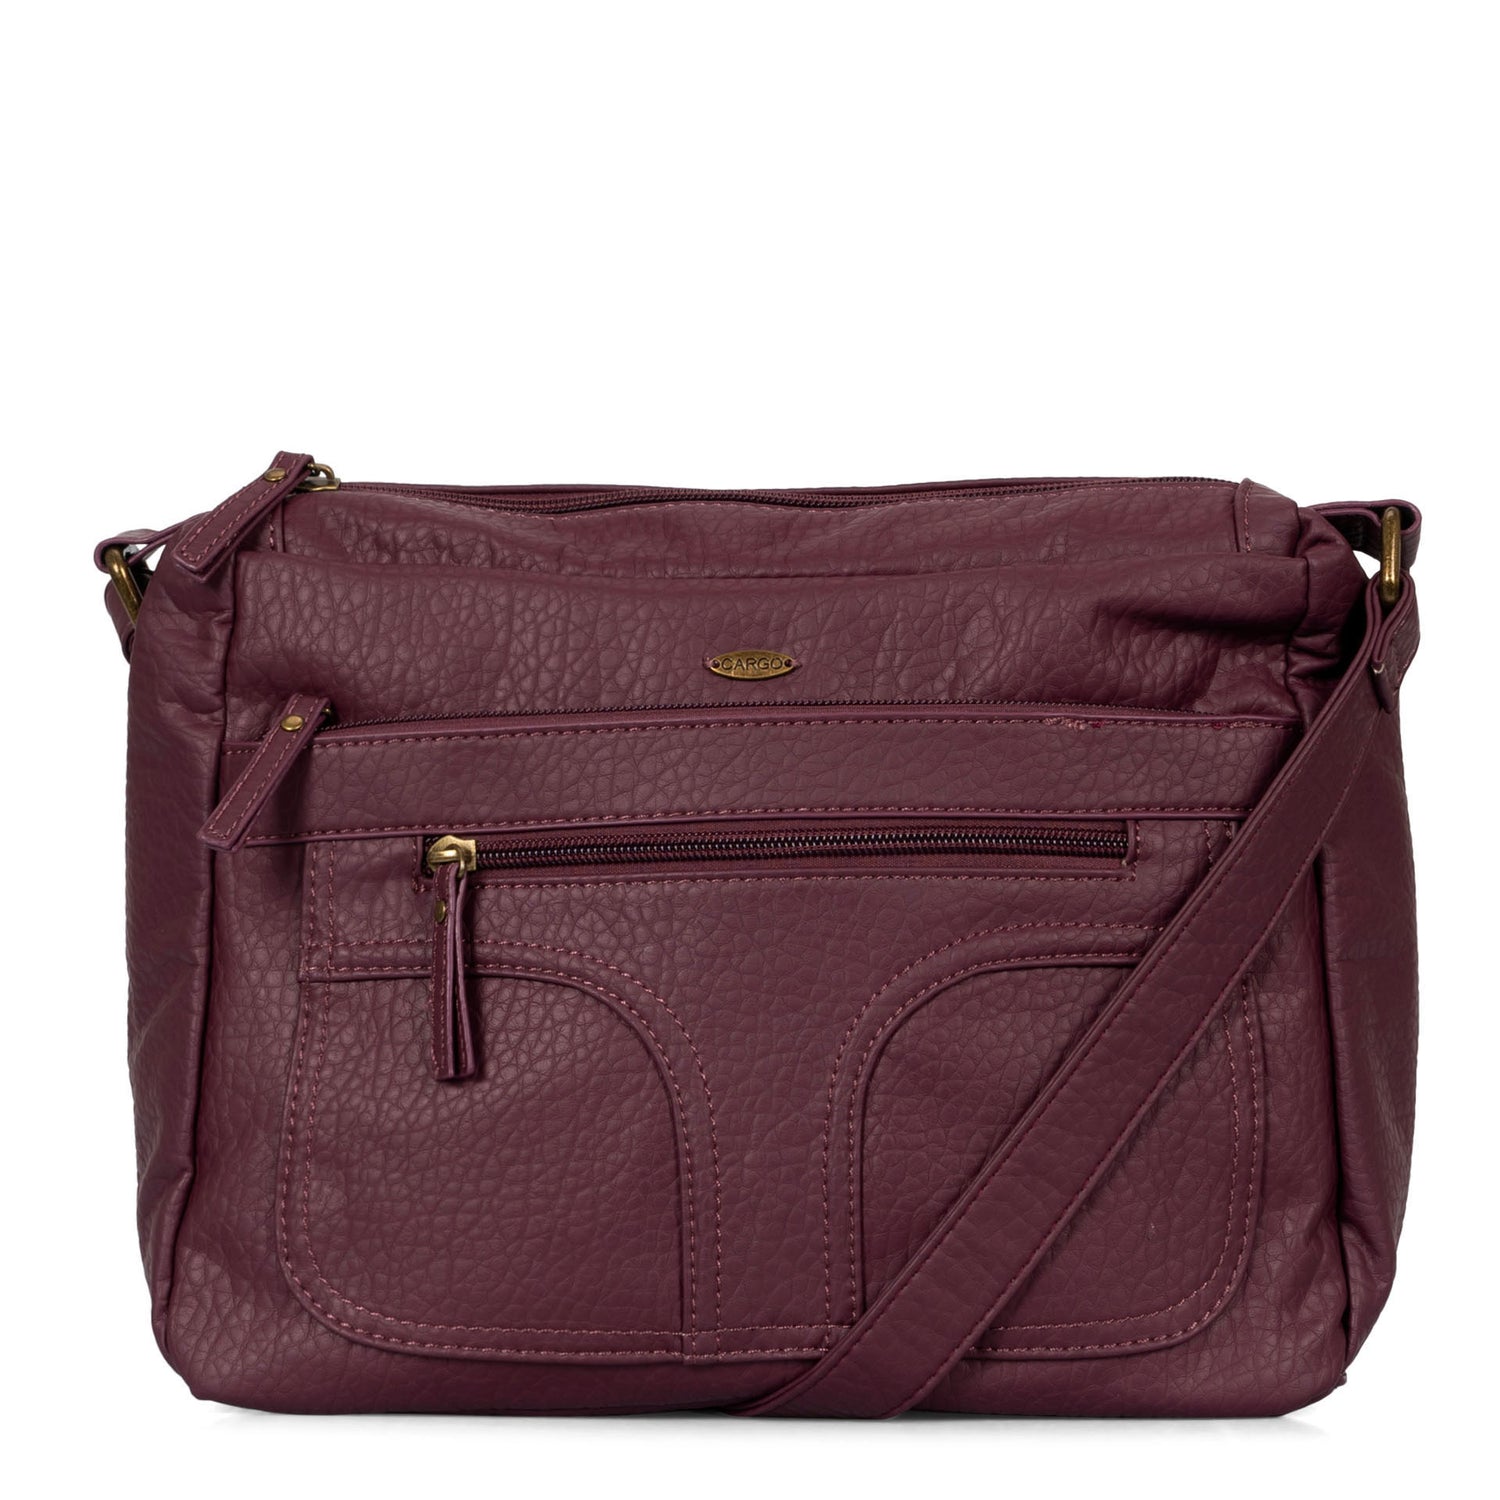 Frontside of a women's burgundy crossbody bag called Pebbled from the brand Cargo on a white background, showcasing its thin strap.